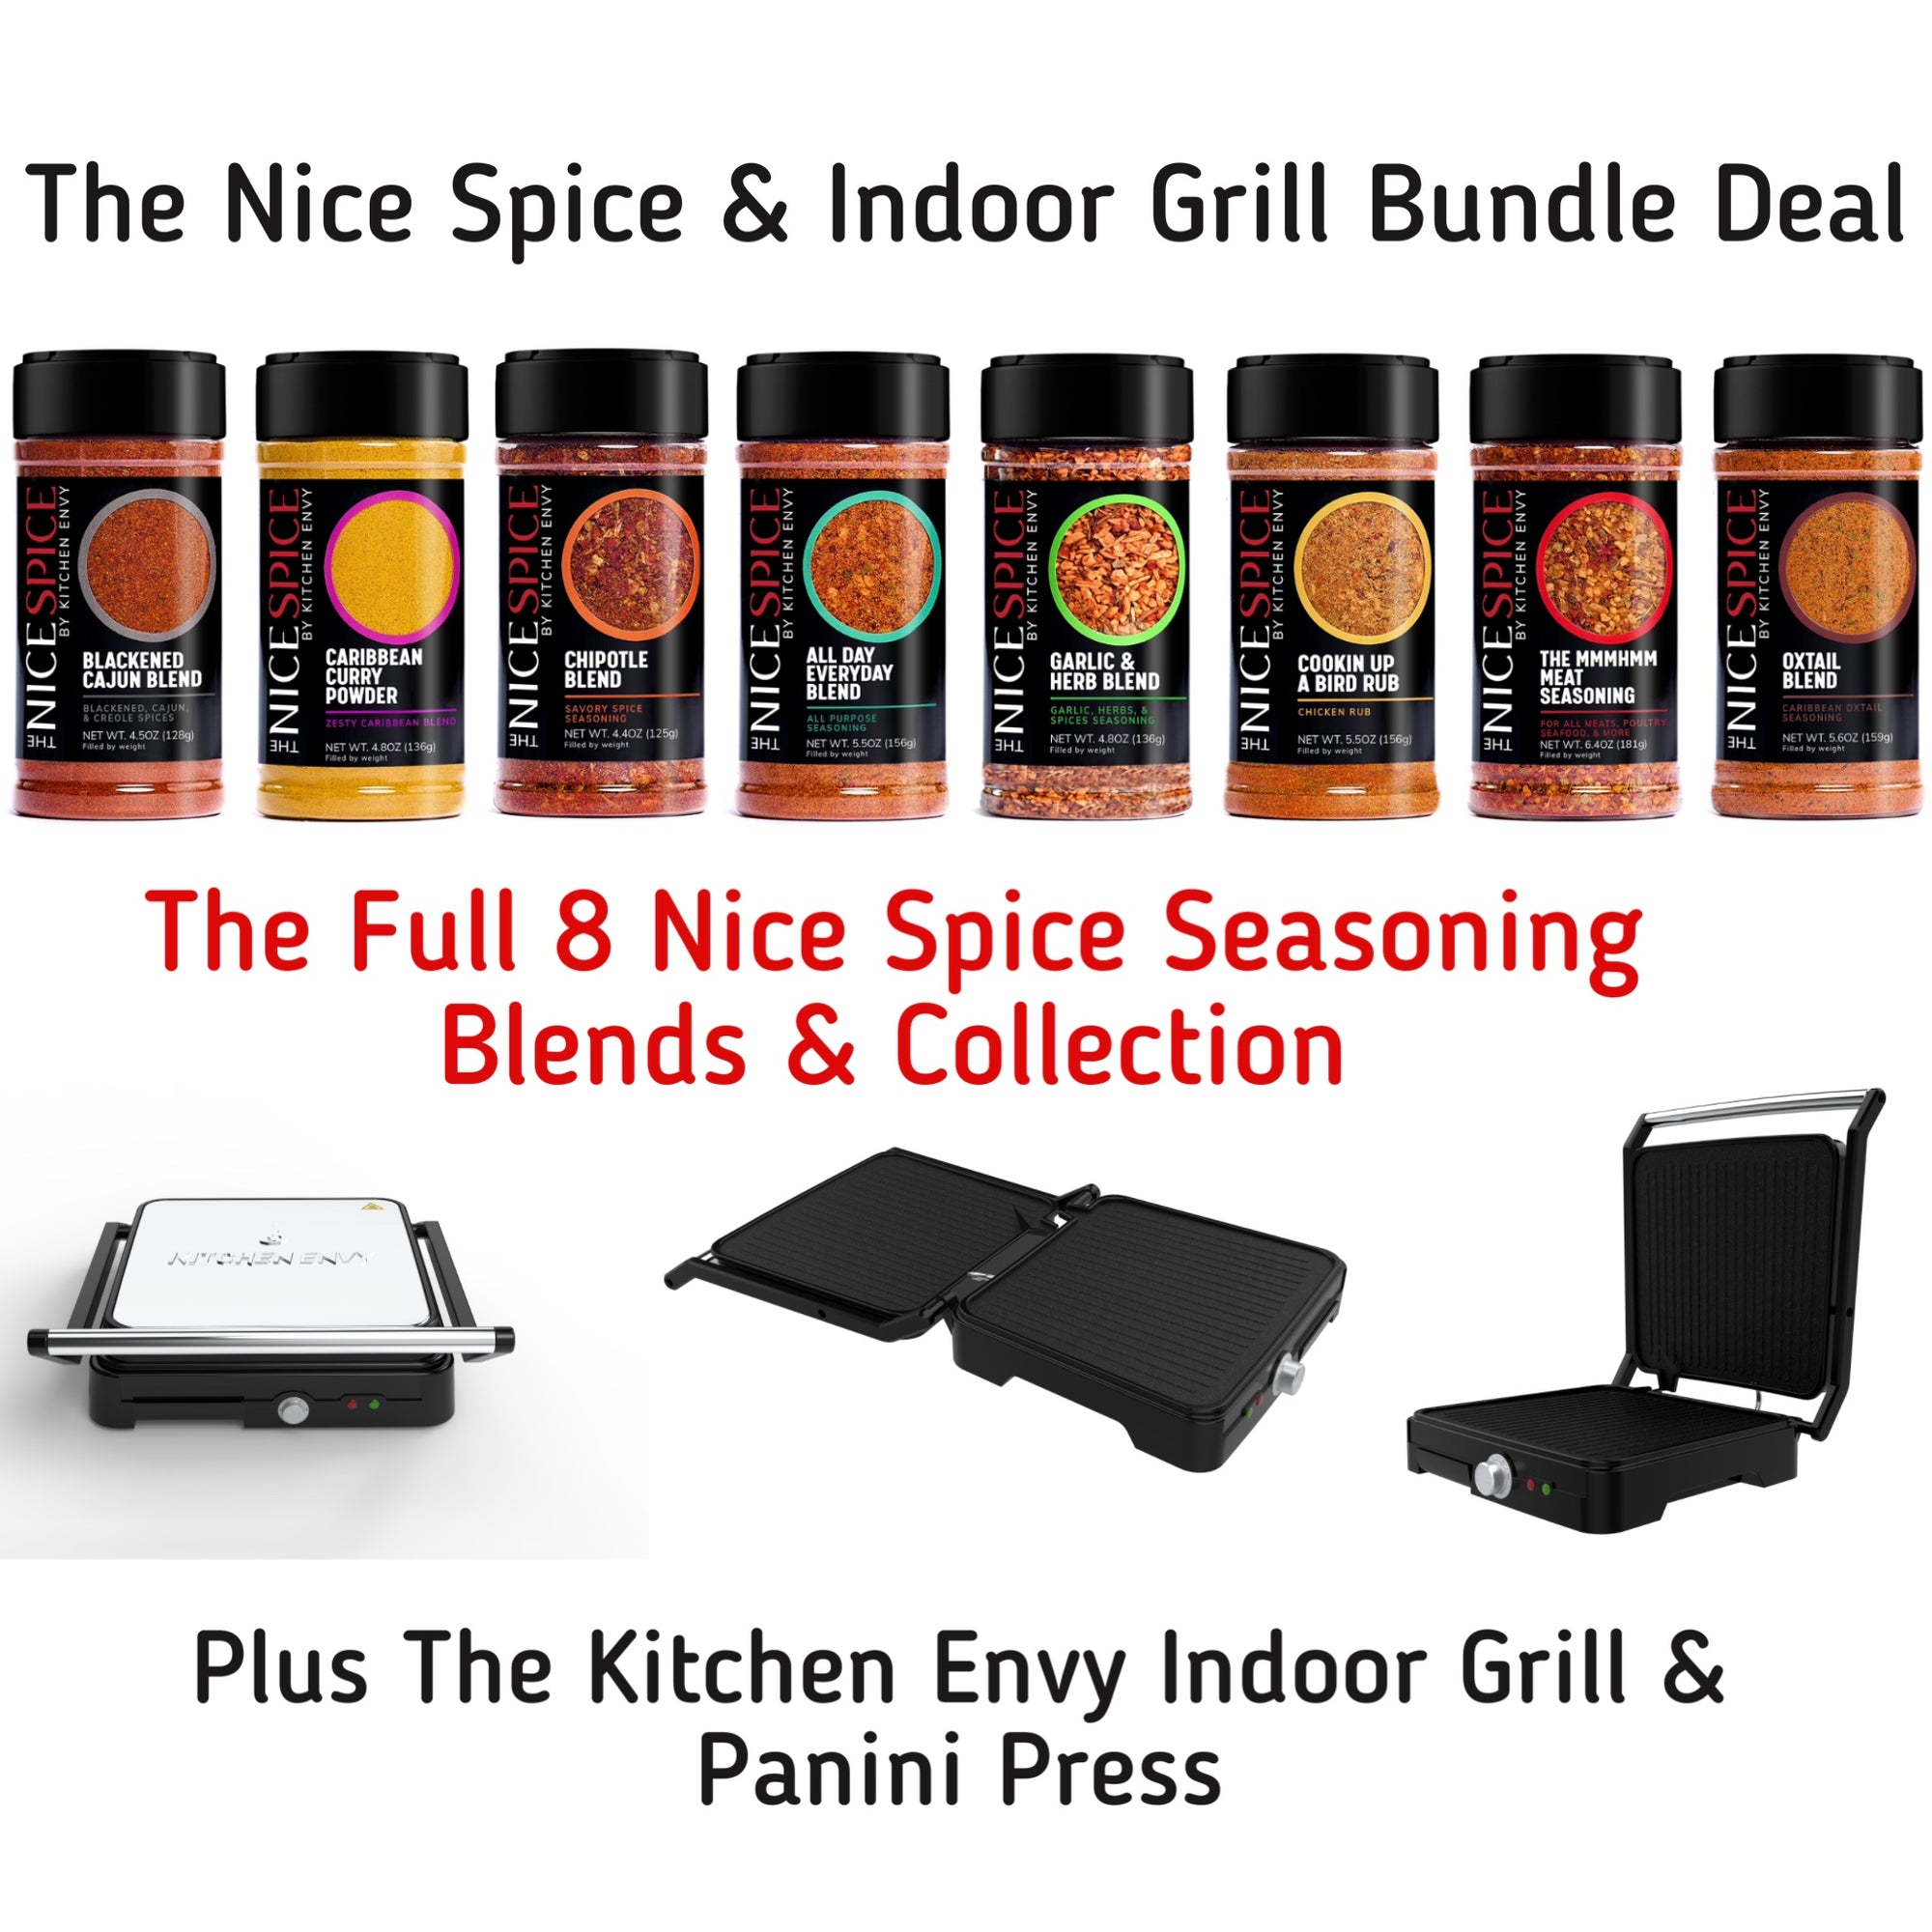 The Nice Spice & Indoor Grill Bundle Deal